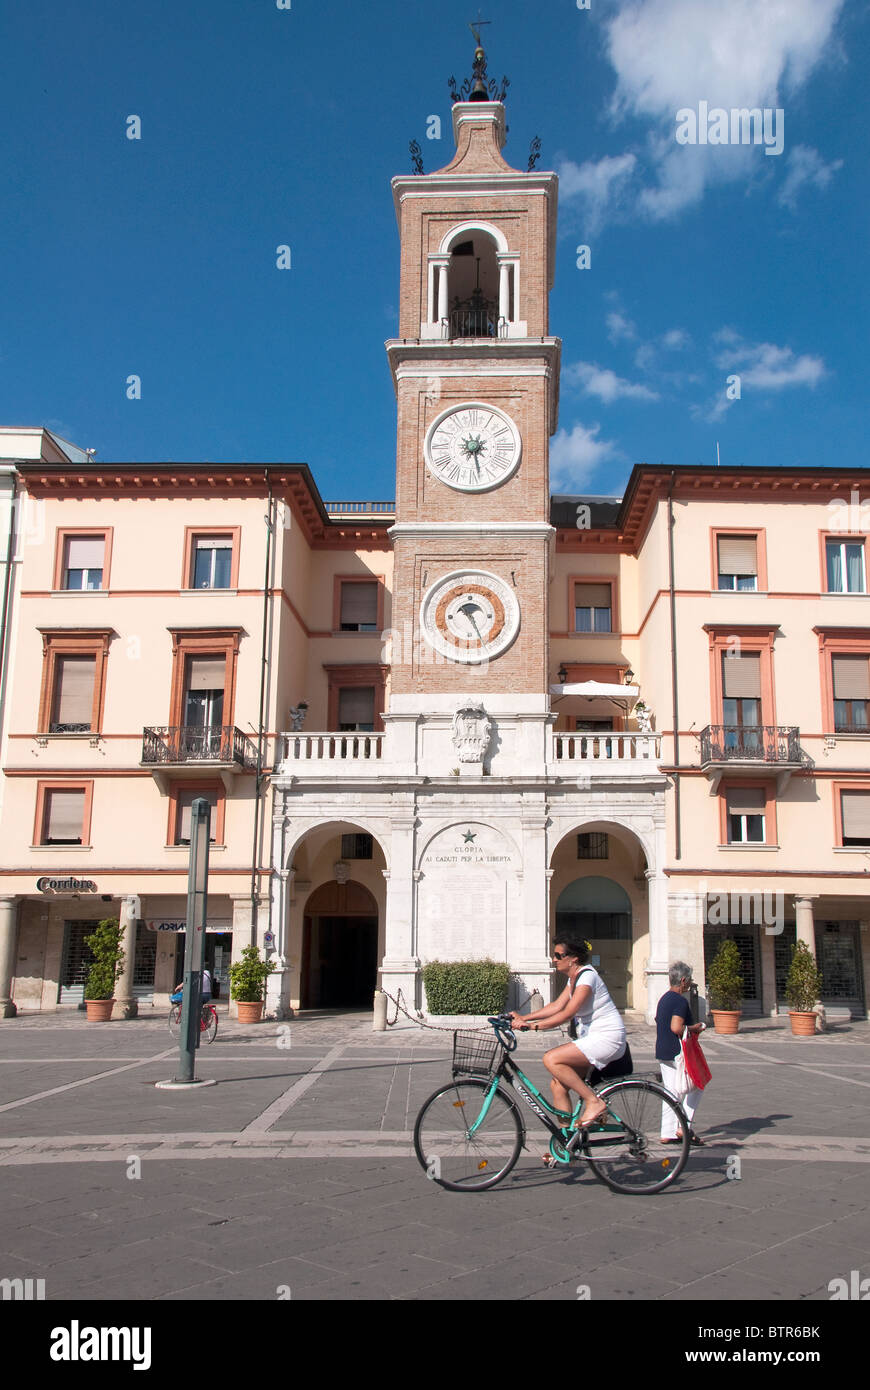 Woman cycling past Clock tower telling the time, date and Zodiac sign in Piazza Cavour, Rimini, Emilia Romagna, Italy Stock Photo